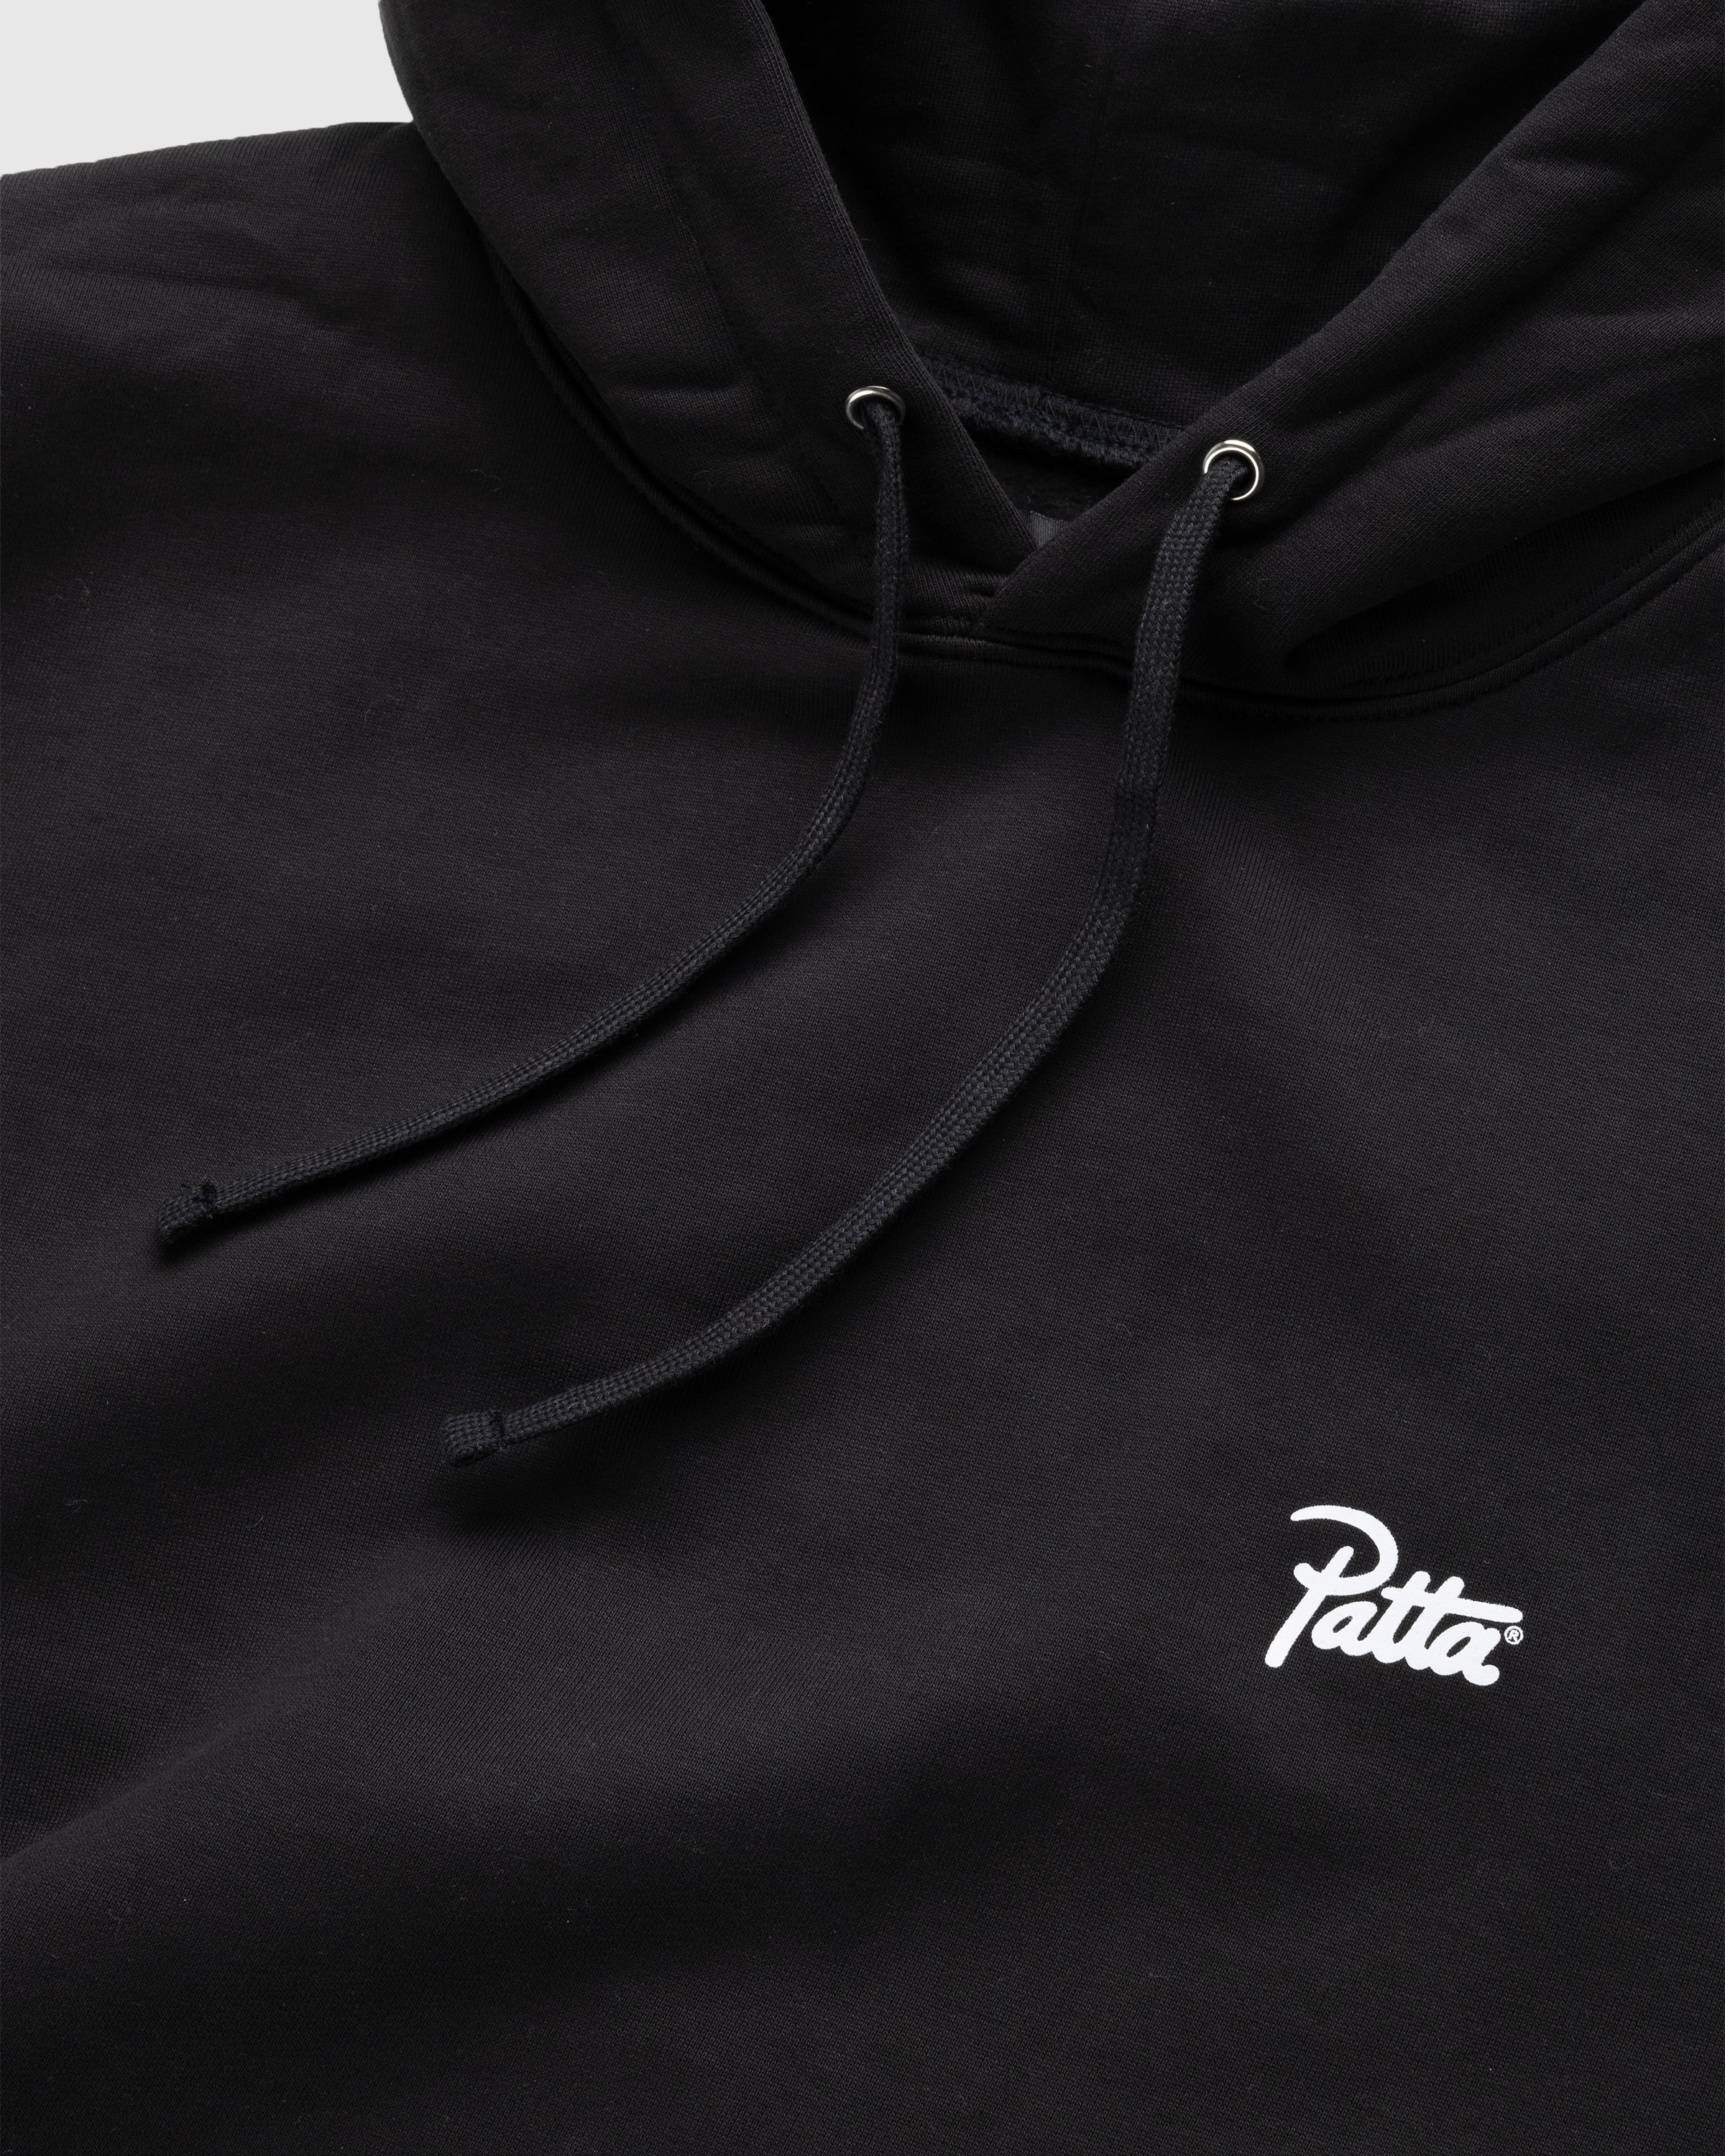 Patta - Forever and Always Boxy Hoodie Black - Clothing - Black - Image 6